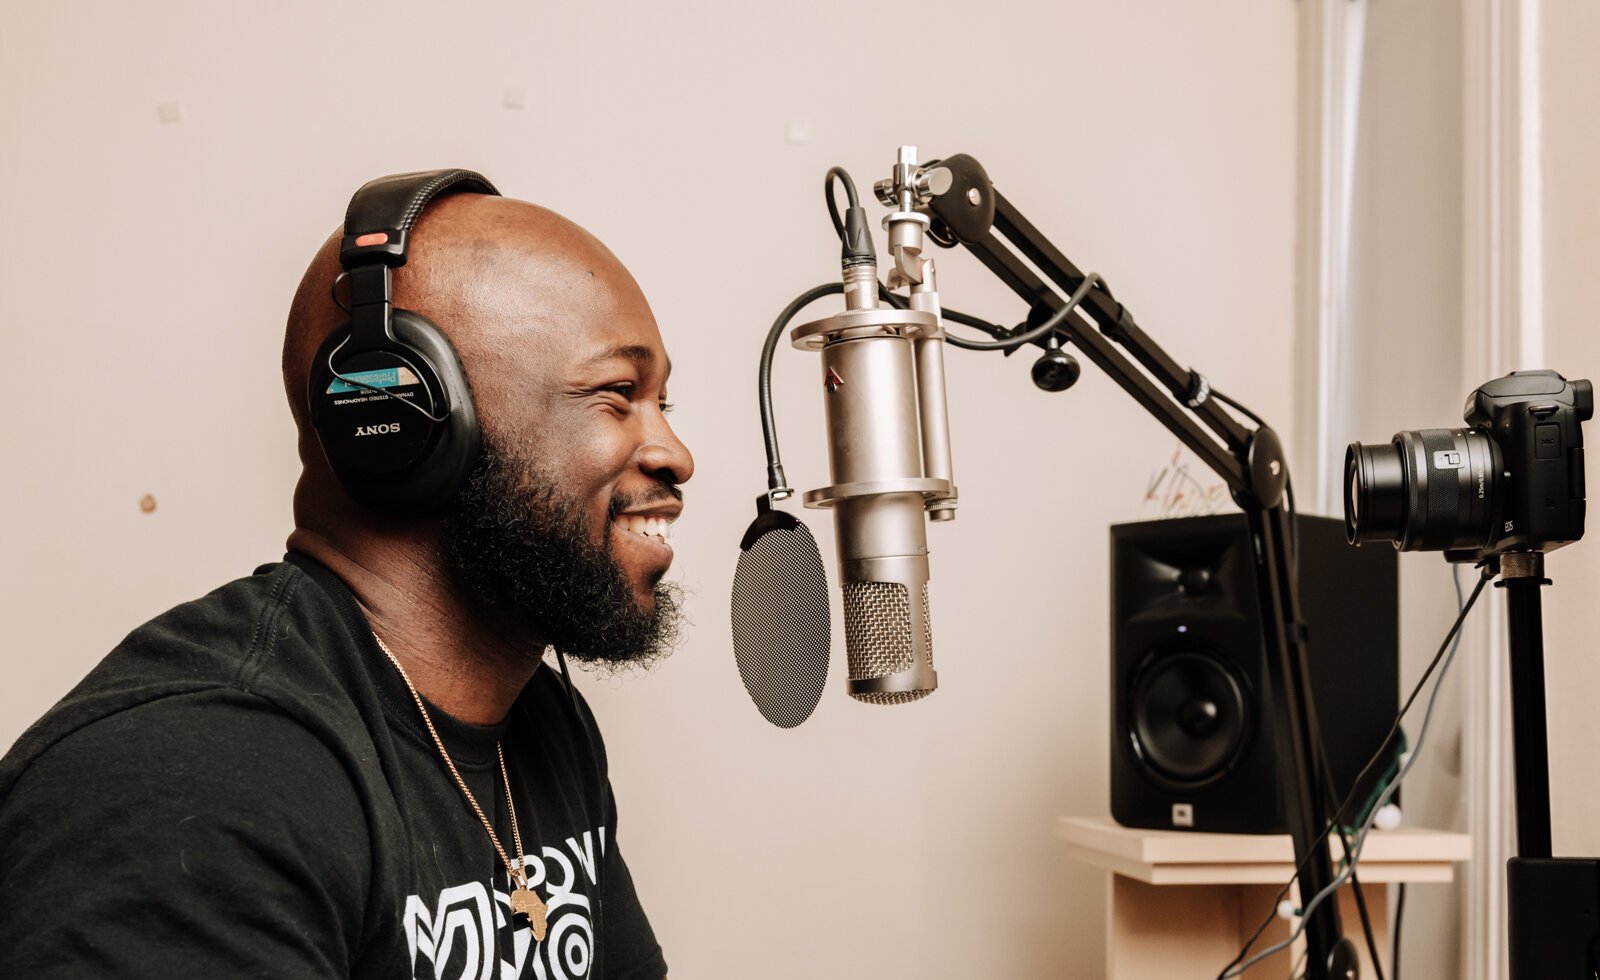 Kibwe Cooper, the host of 'Empower You Podcast', works on a podcast in his studio at home.